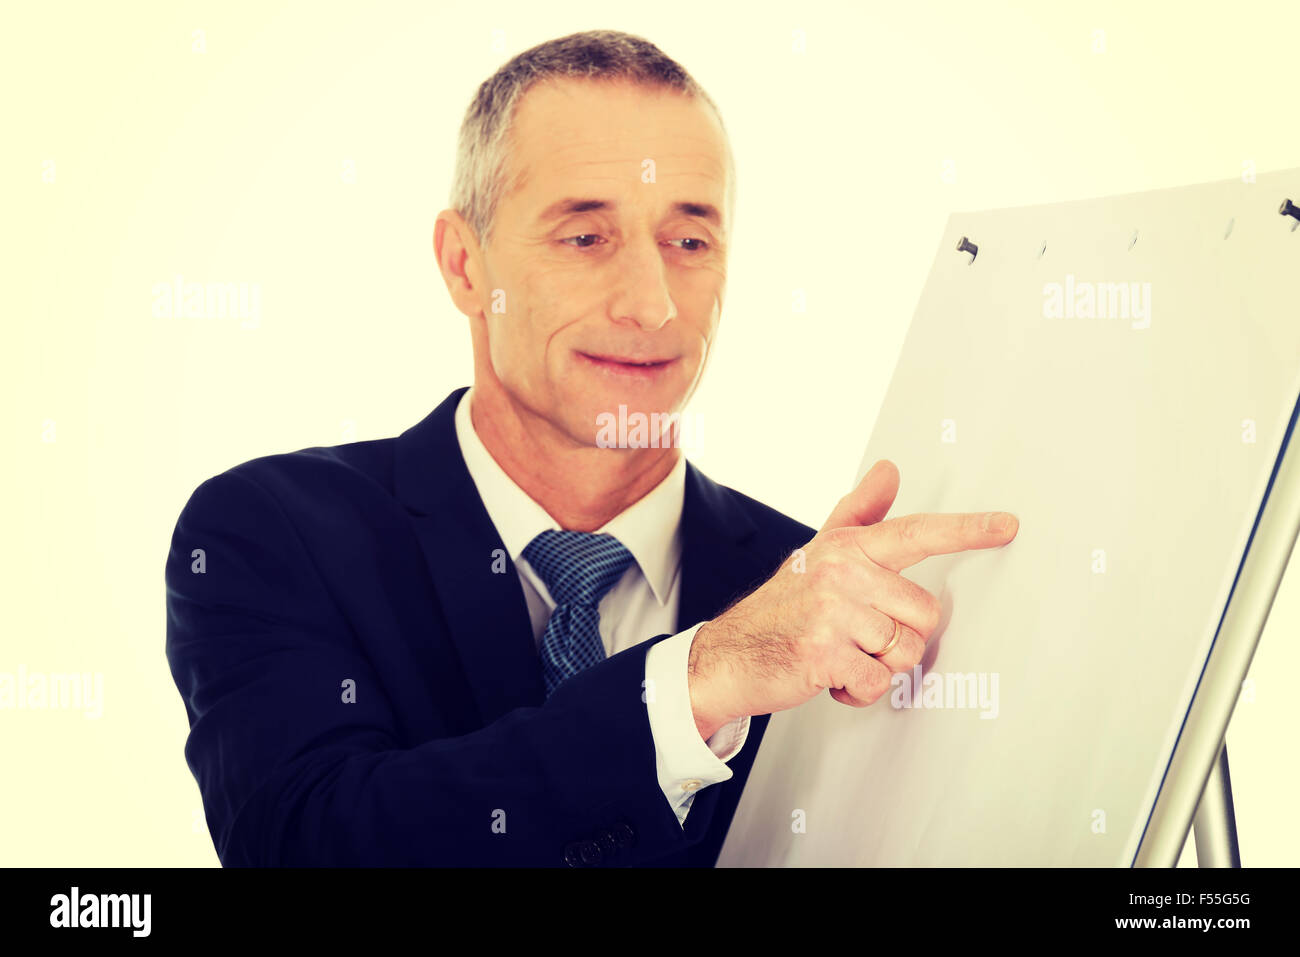 Male executive presenting on flip chart Stock Photo